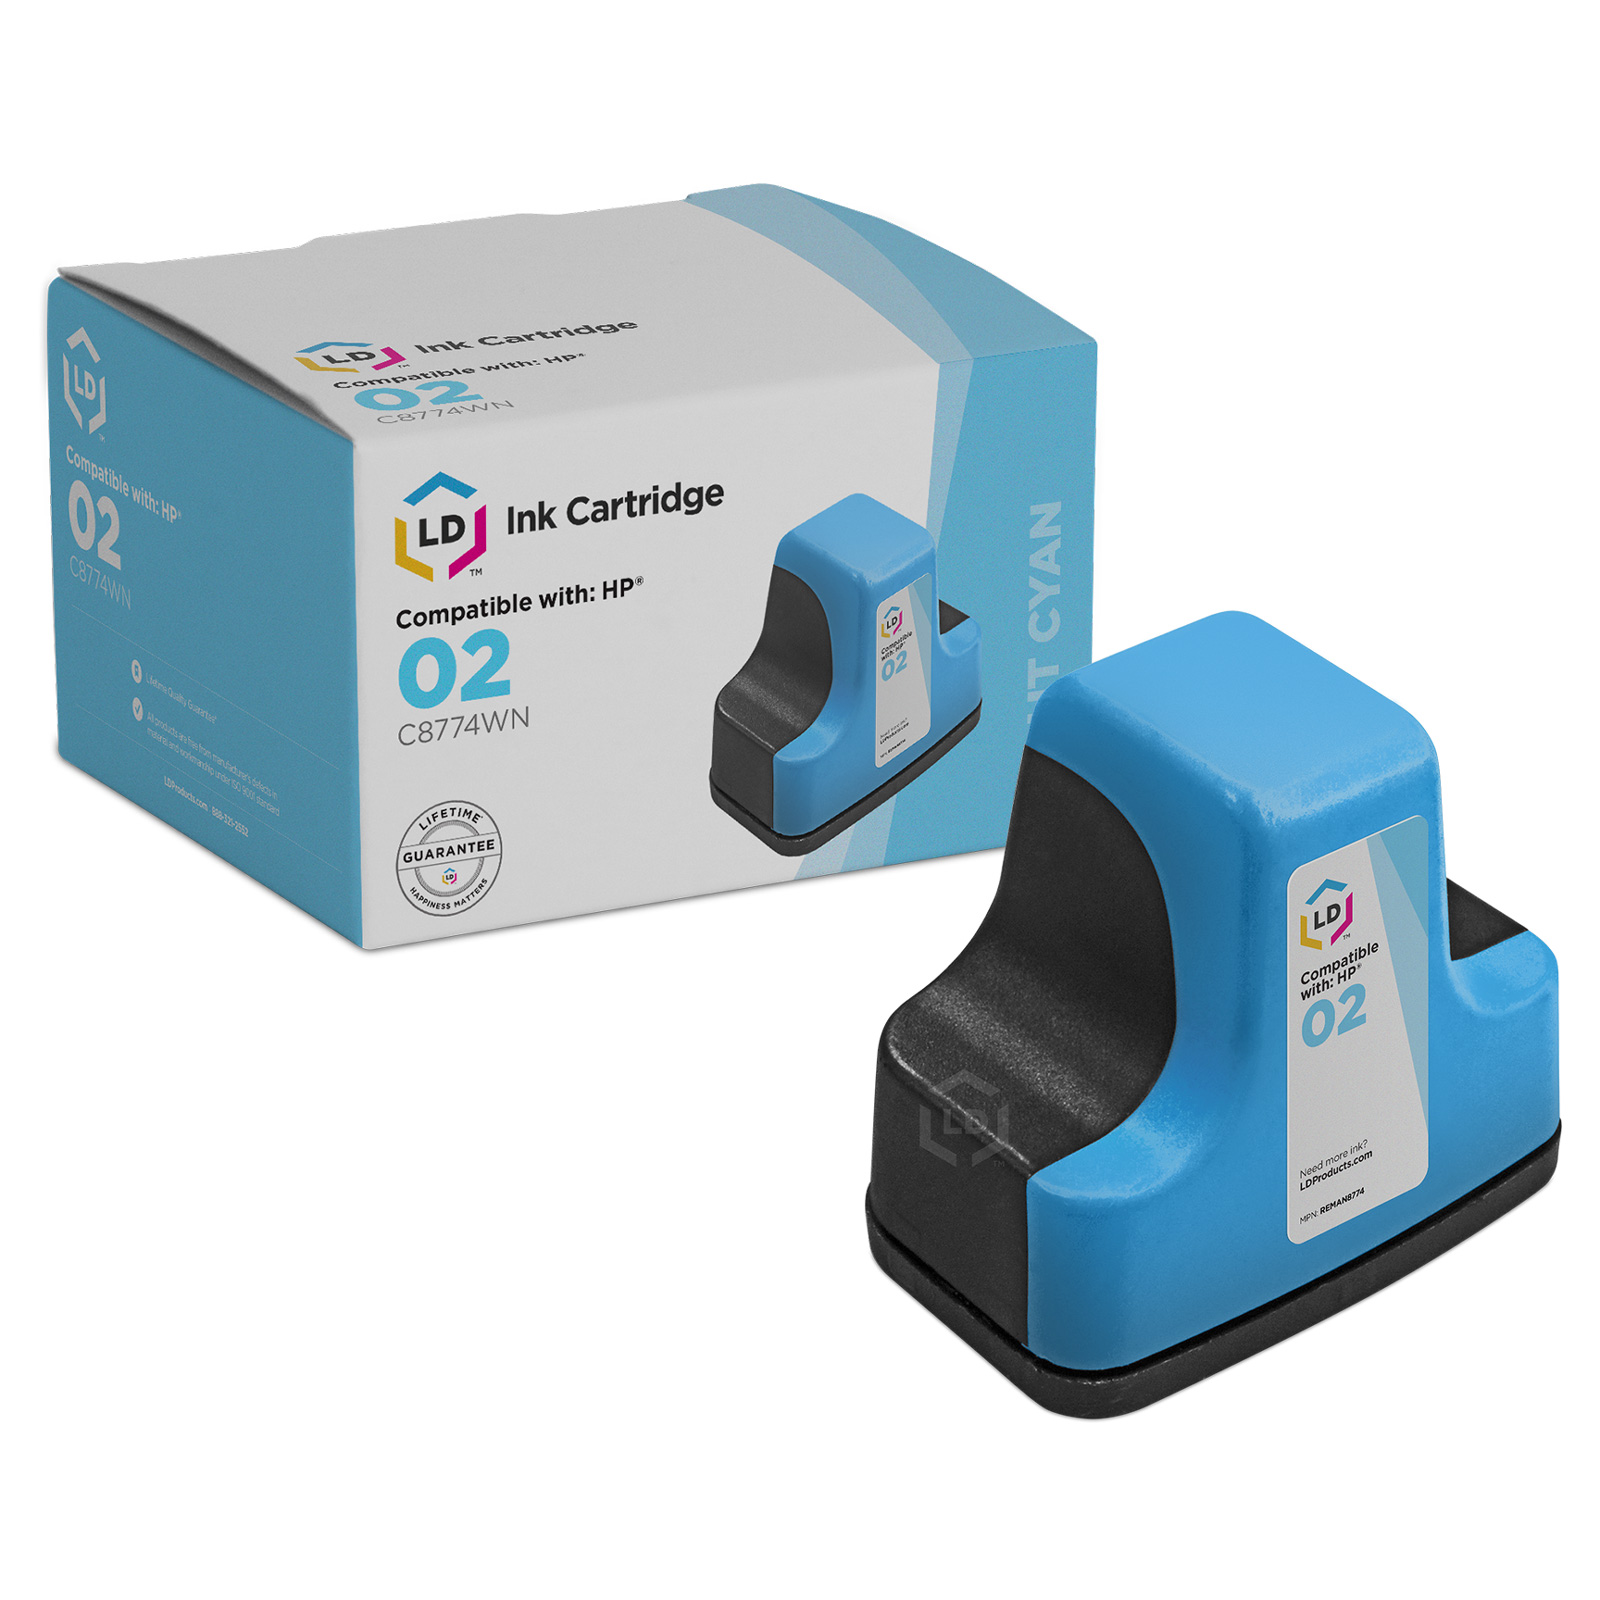 LD Remanufactured Replacement Ink Cartridge for Hewlett Packard C8774WN (HP 02) Light Cyan - image 1 of 2